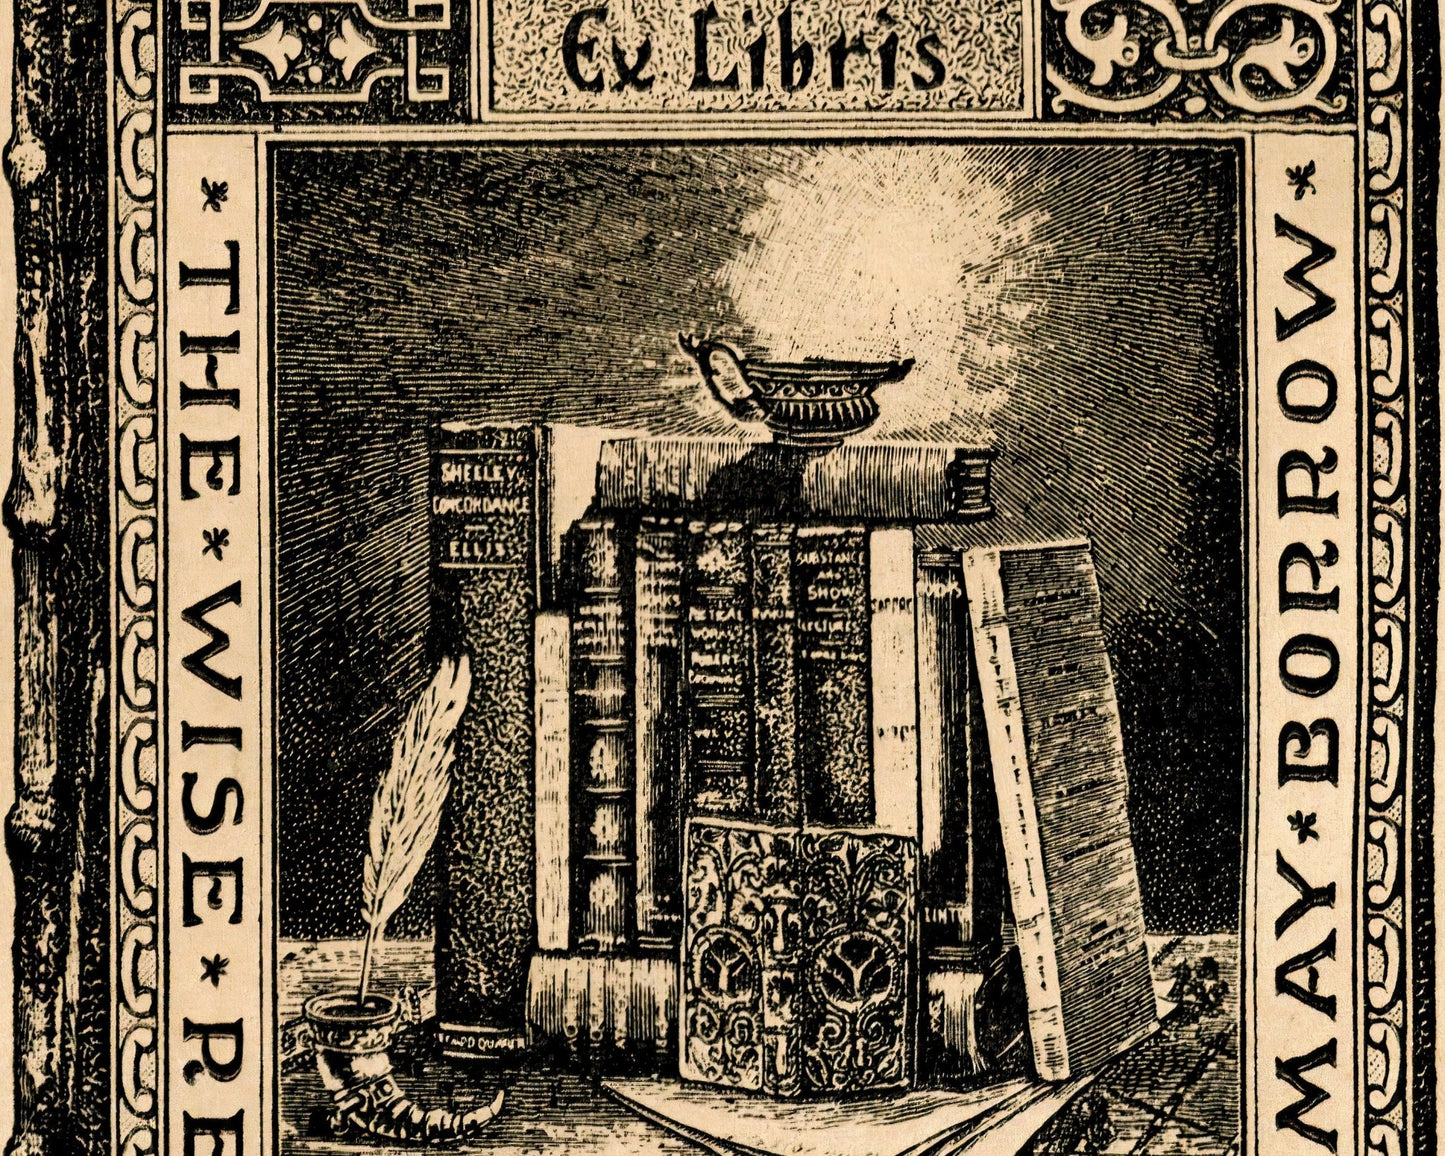 Vintage Ex - Libris / Bookplate Illustration "The Wise Return That They Again May Borrow" - Mabon Gallery